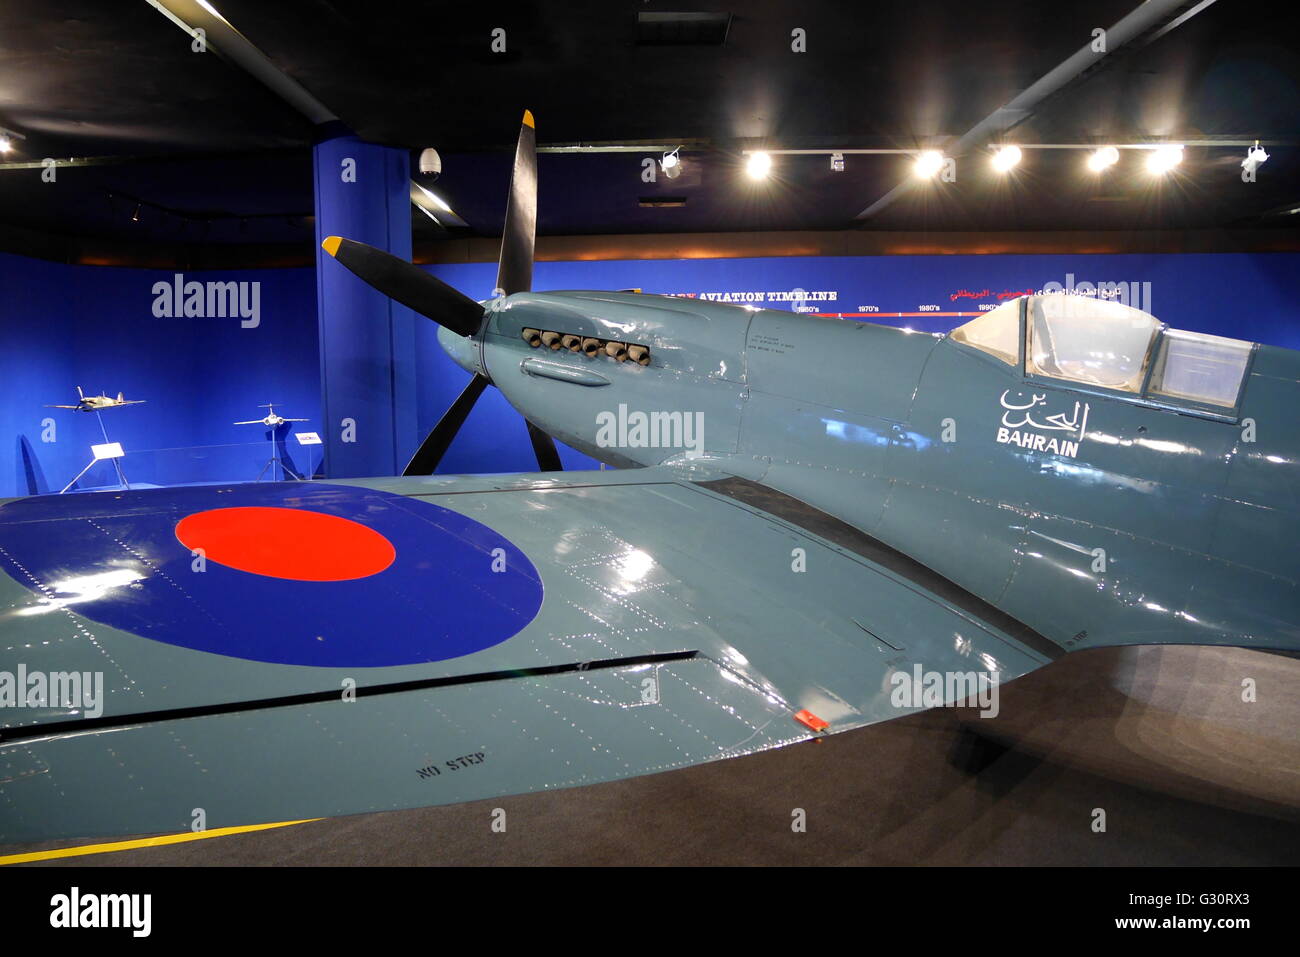 Spitfire on display at the Bahrain National Museum as part of the 200th anniversary of relations between Britain and Bahrain. Stock Photo